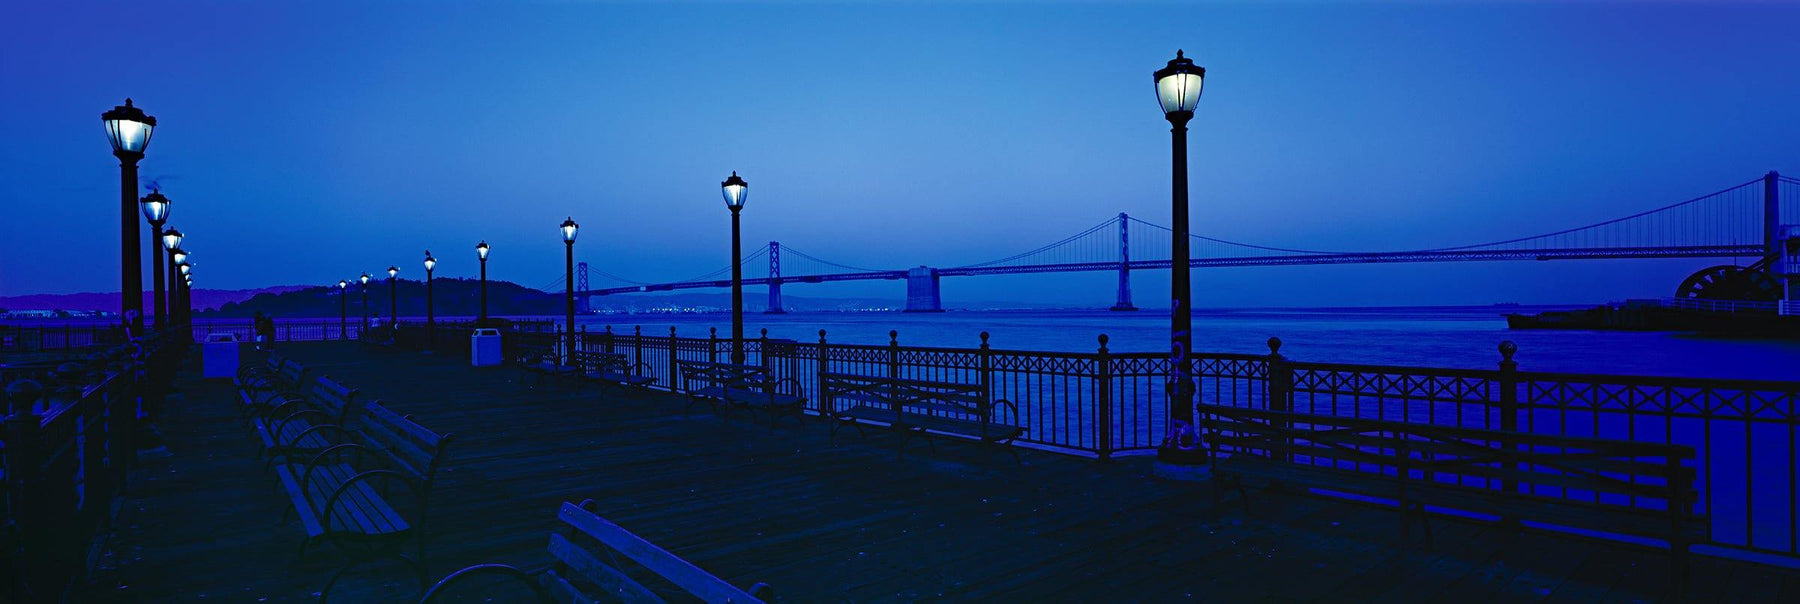 Wooden pier with antique lamp posts and benches at night in the San Francisco Bay